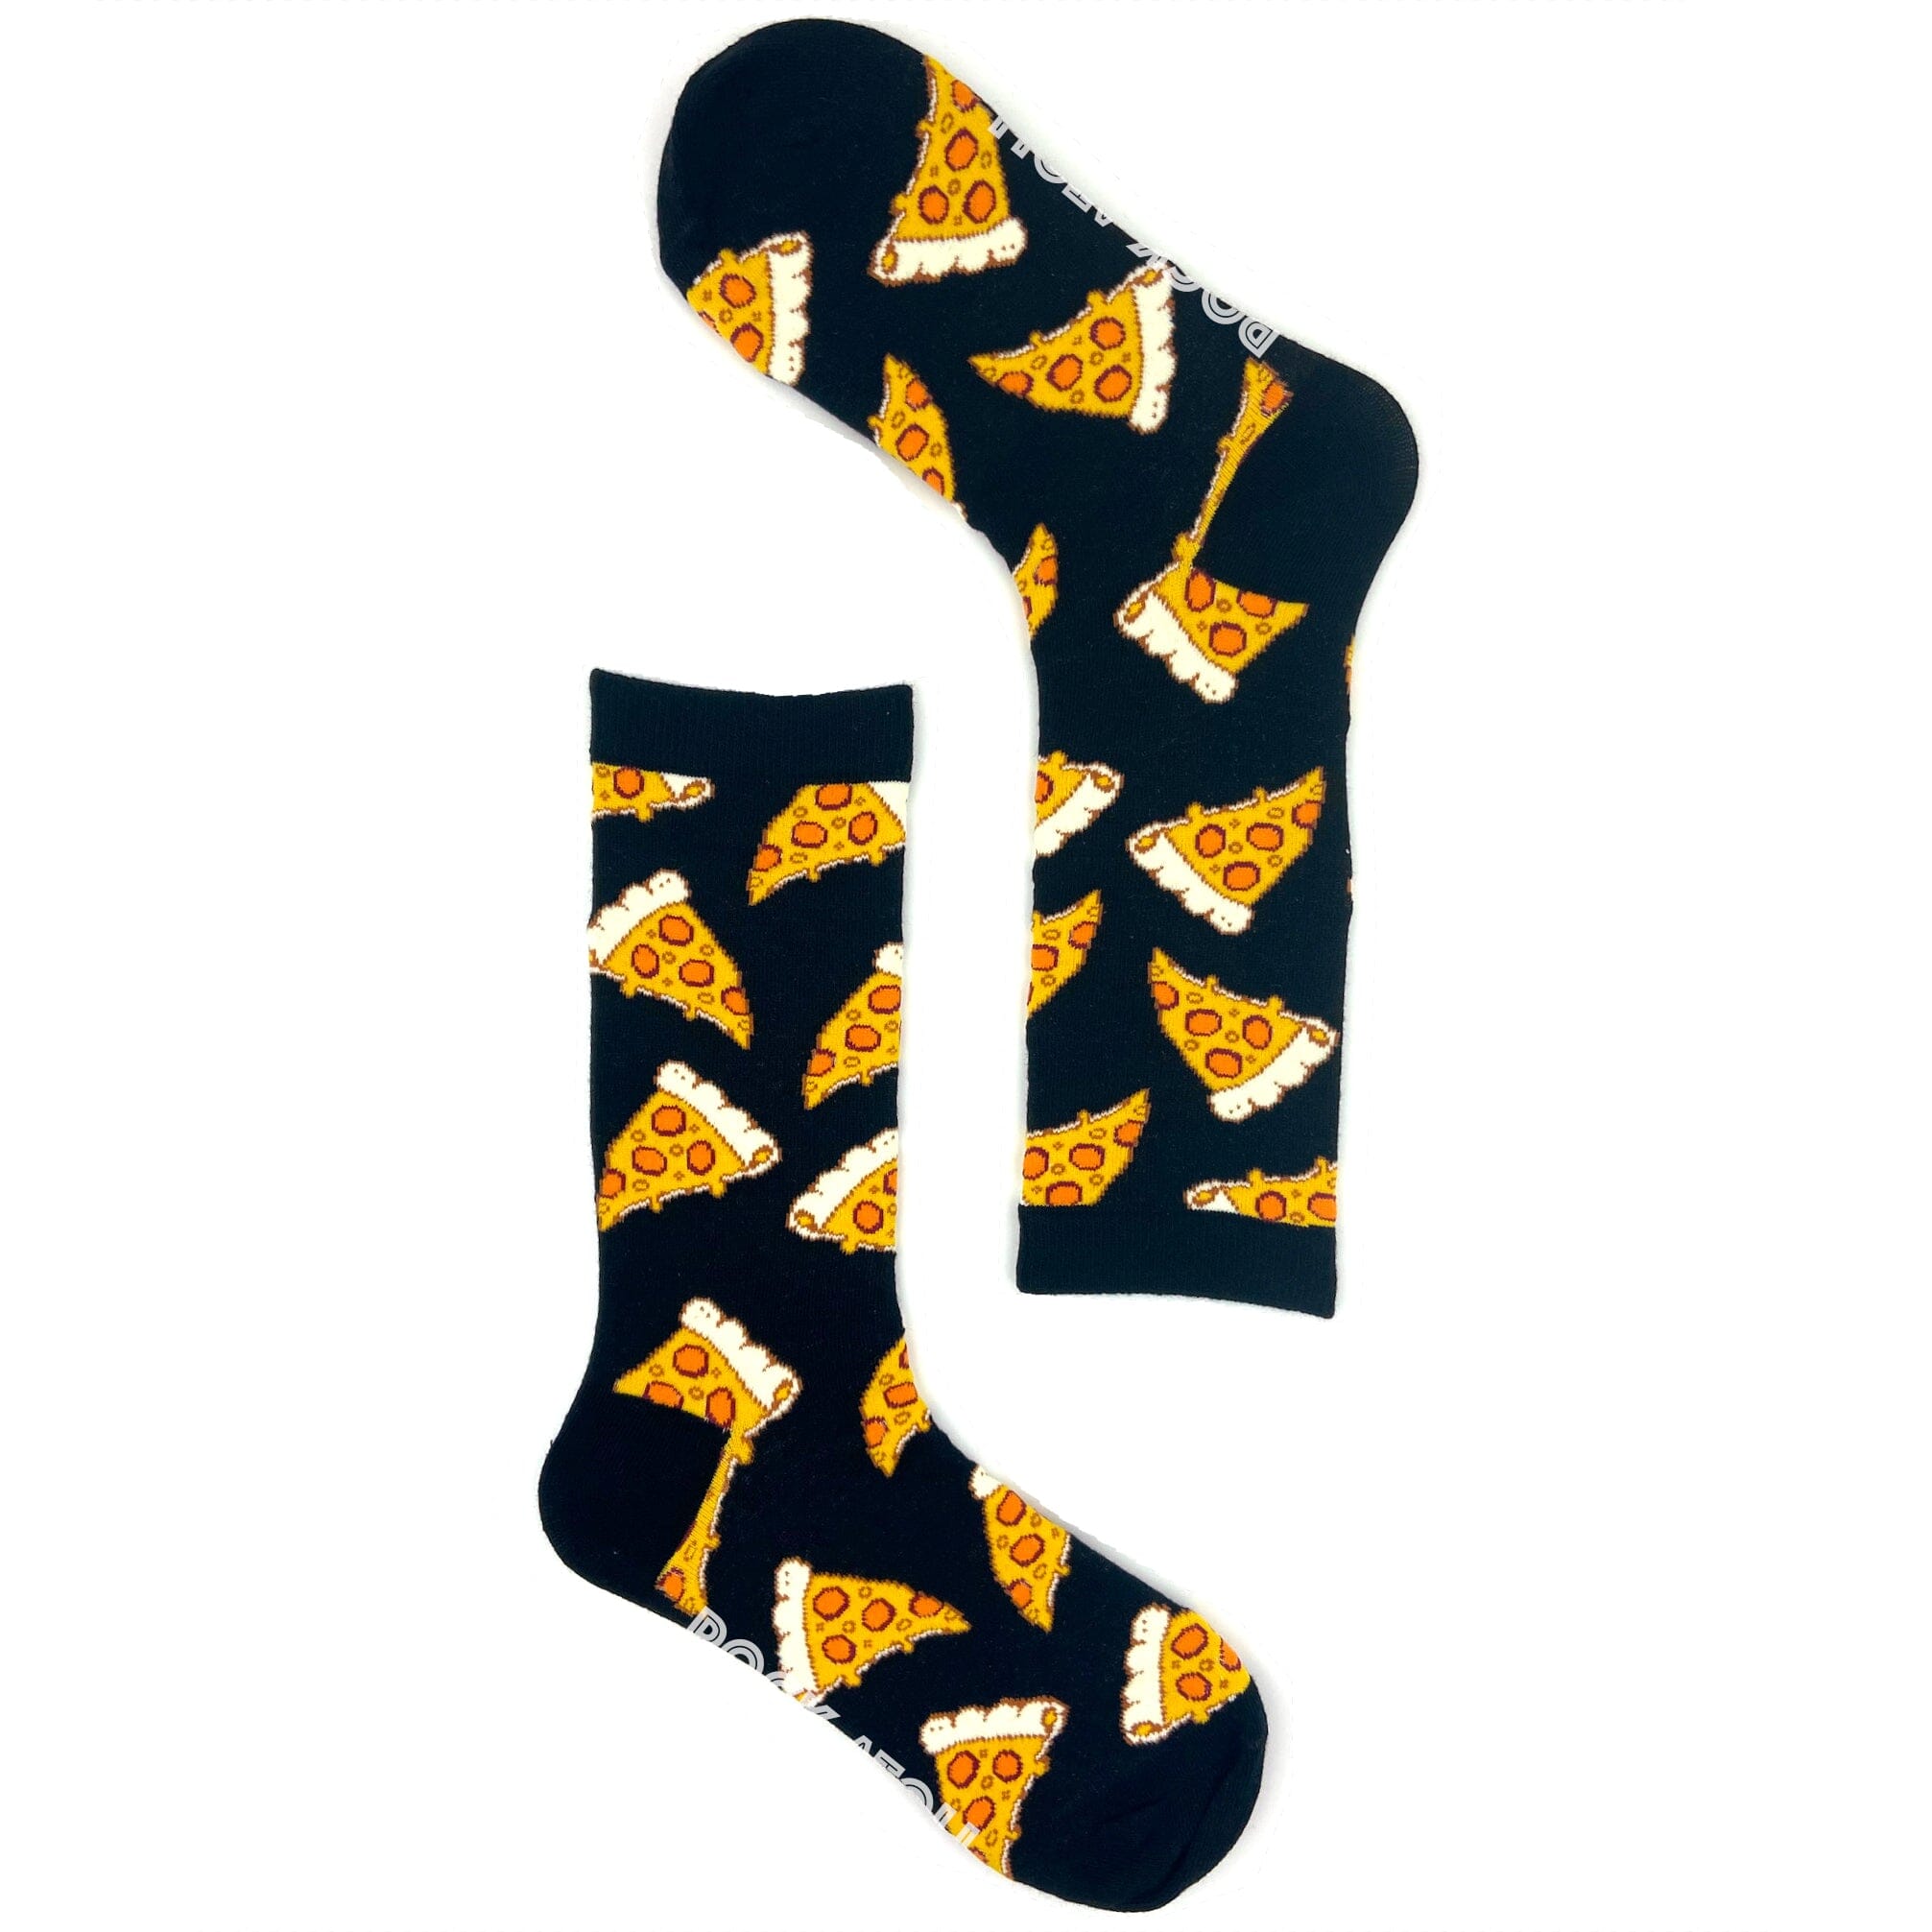 Unisex Cheesy Pizza Print Foodie Inspired Novelty Patterned Crew Socks